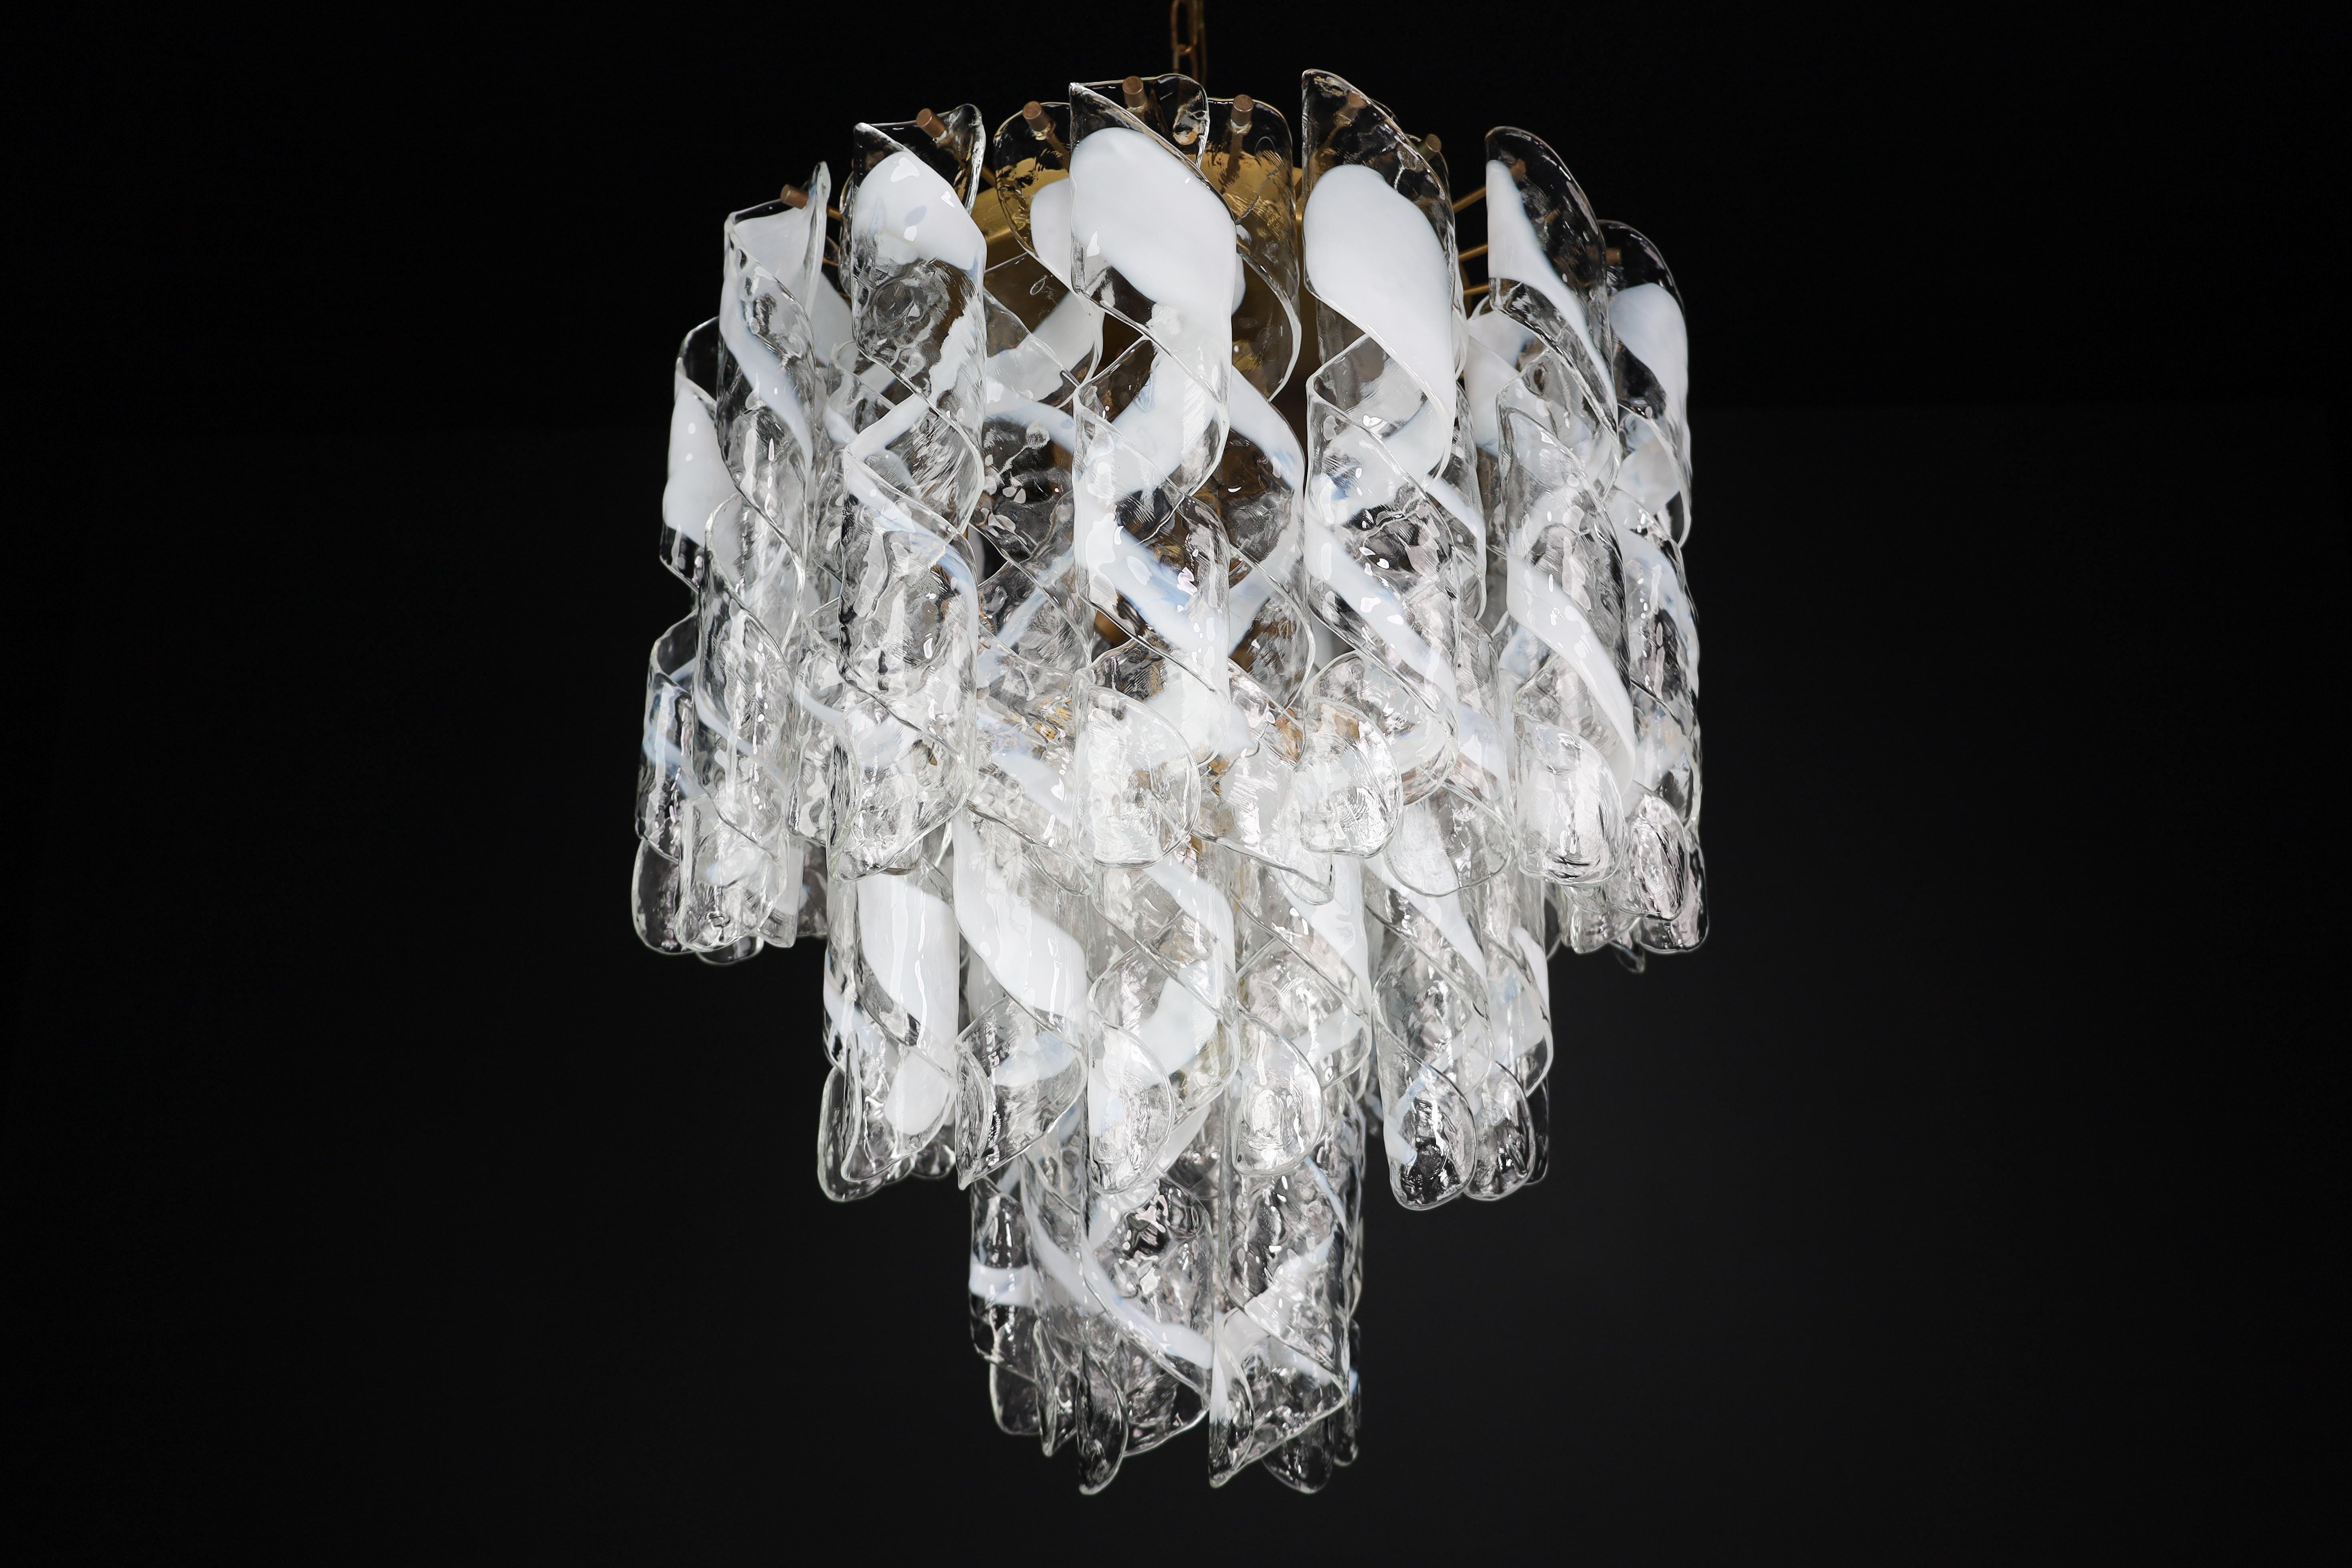 Large brass chandelier with 'Torciglioni' Glass by Mazzega, Italy 1970s.

Fabulous large brass chandelier attributed to Murano brand A.V Mazzega made in Italy 1970s. The chandelier has spiral-shaped glass pieces (called 'Torciglioni') with white